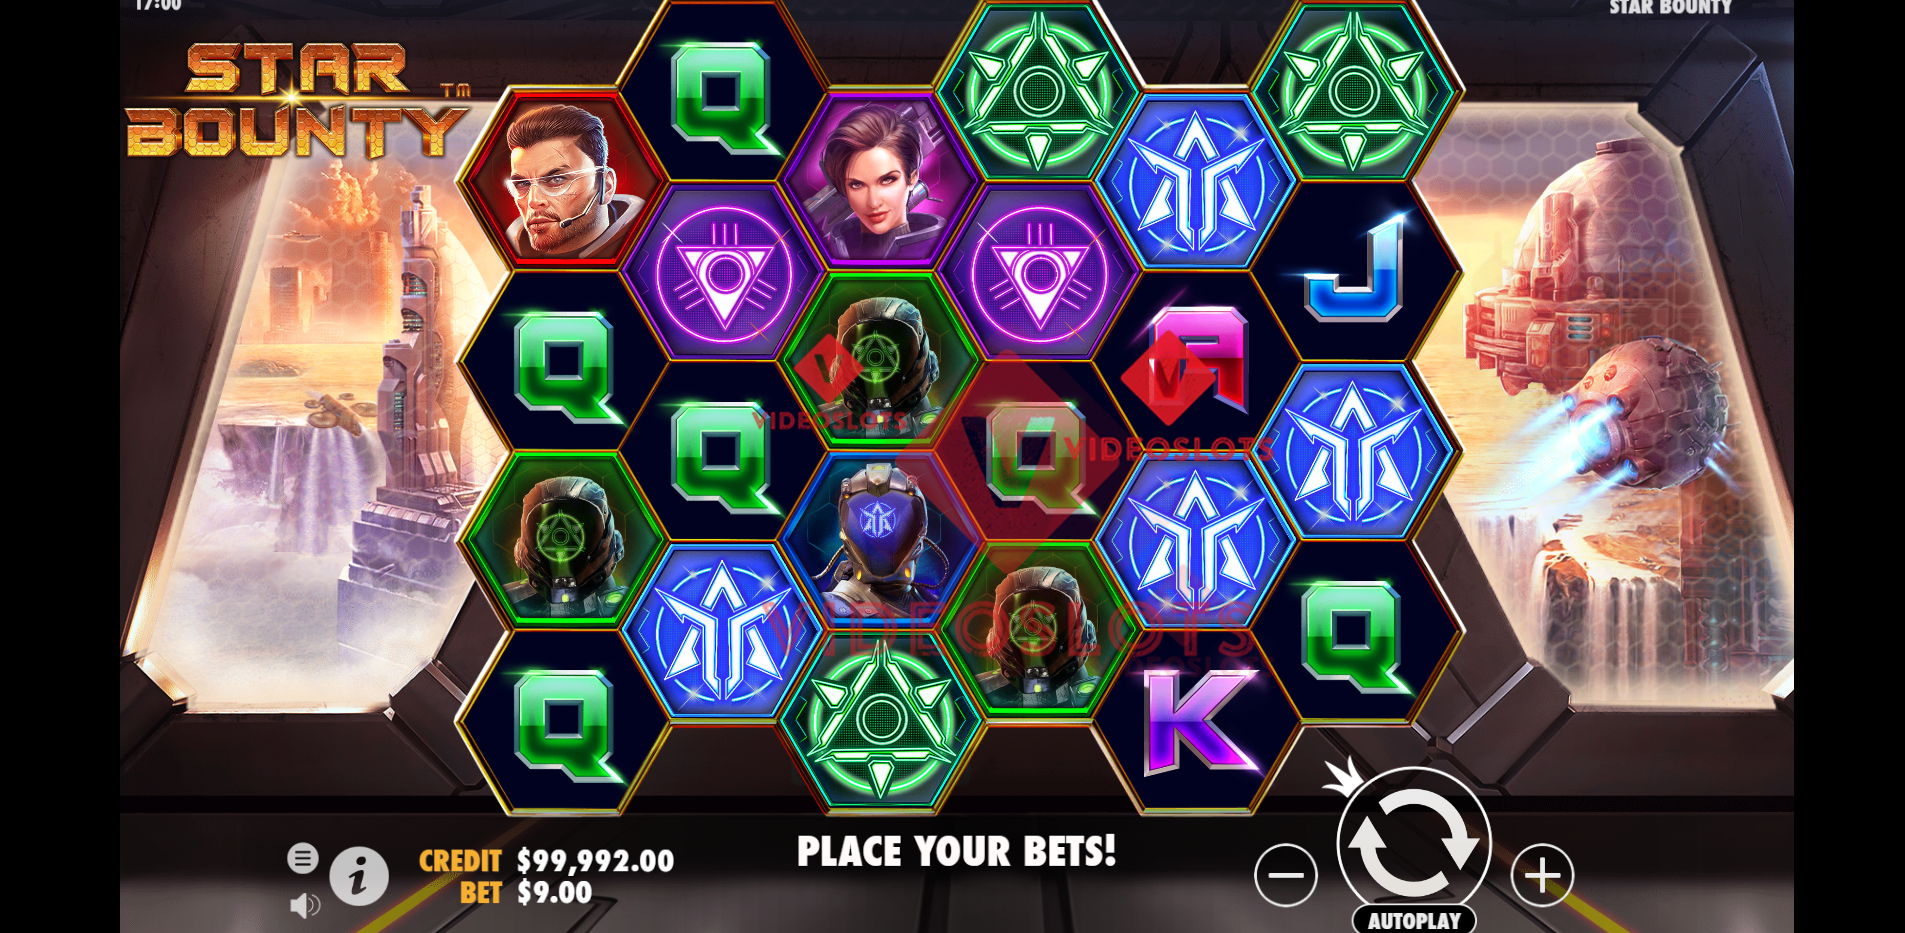 Base Game for Star Bounty slot by Pragmatic Play